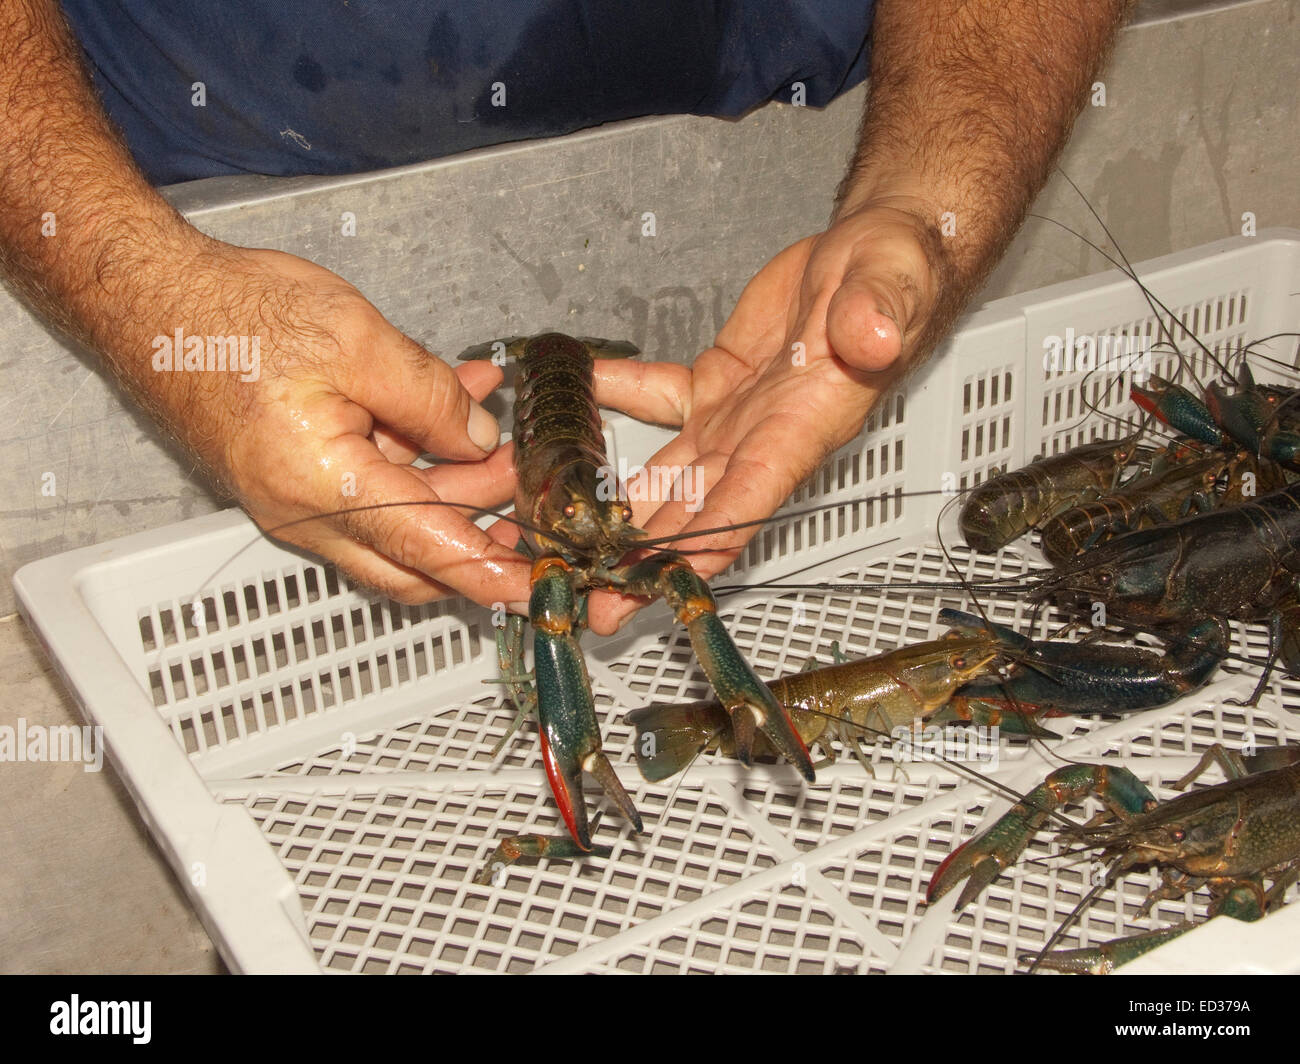 Large red claw freshwater crayfish, Cherax quadricarinatus, in man's hands after being harvested at Australian aquaculture farm Stock Photo